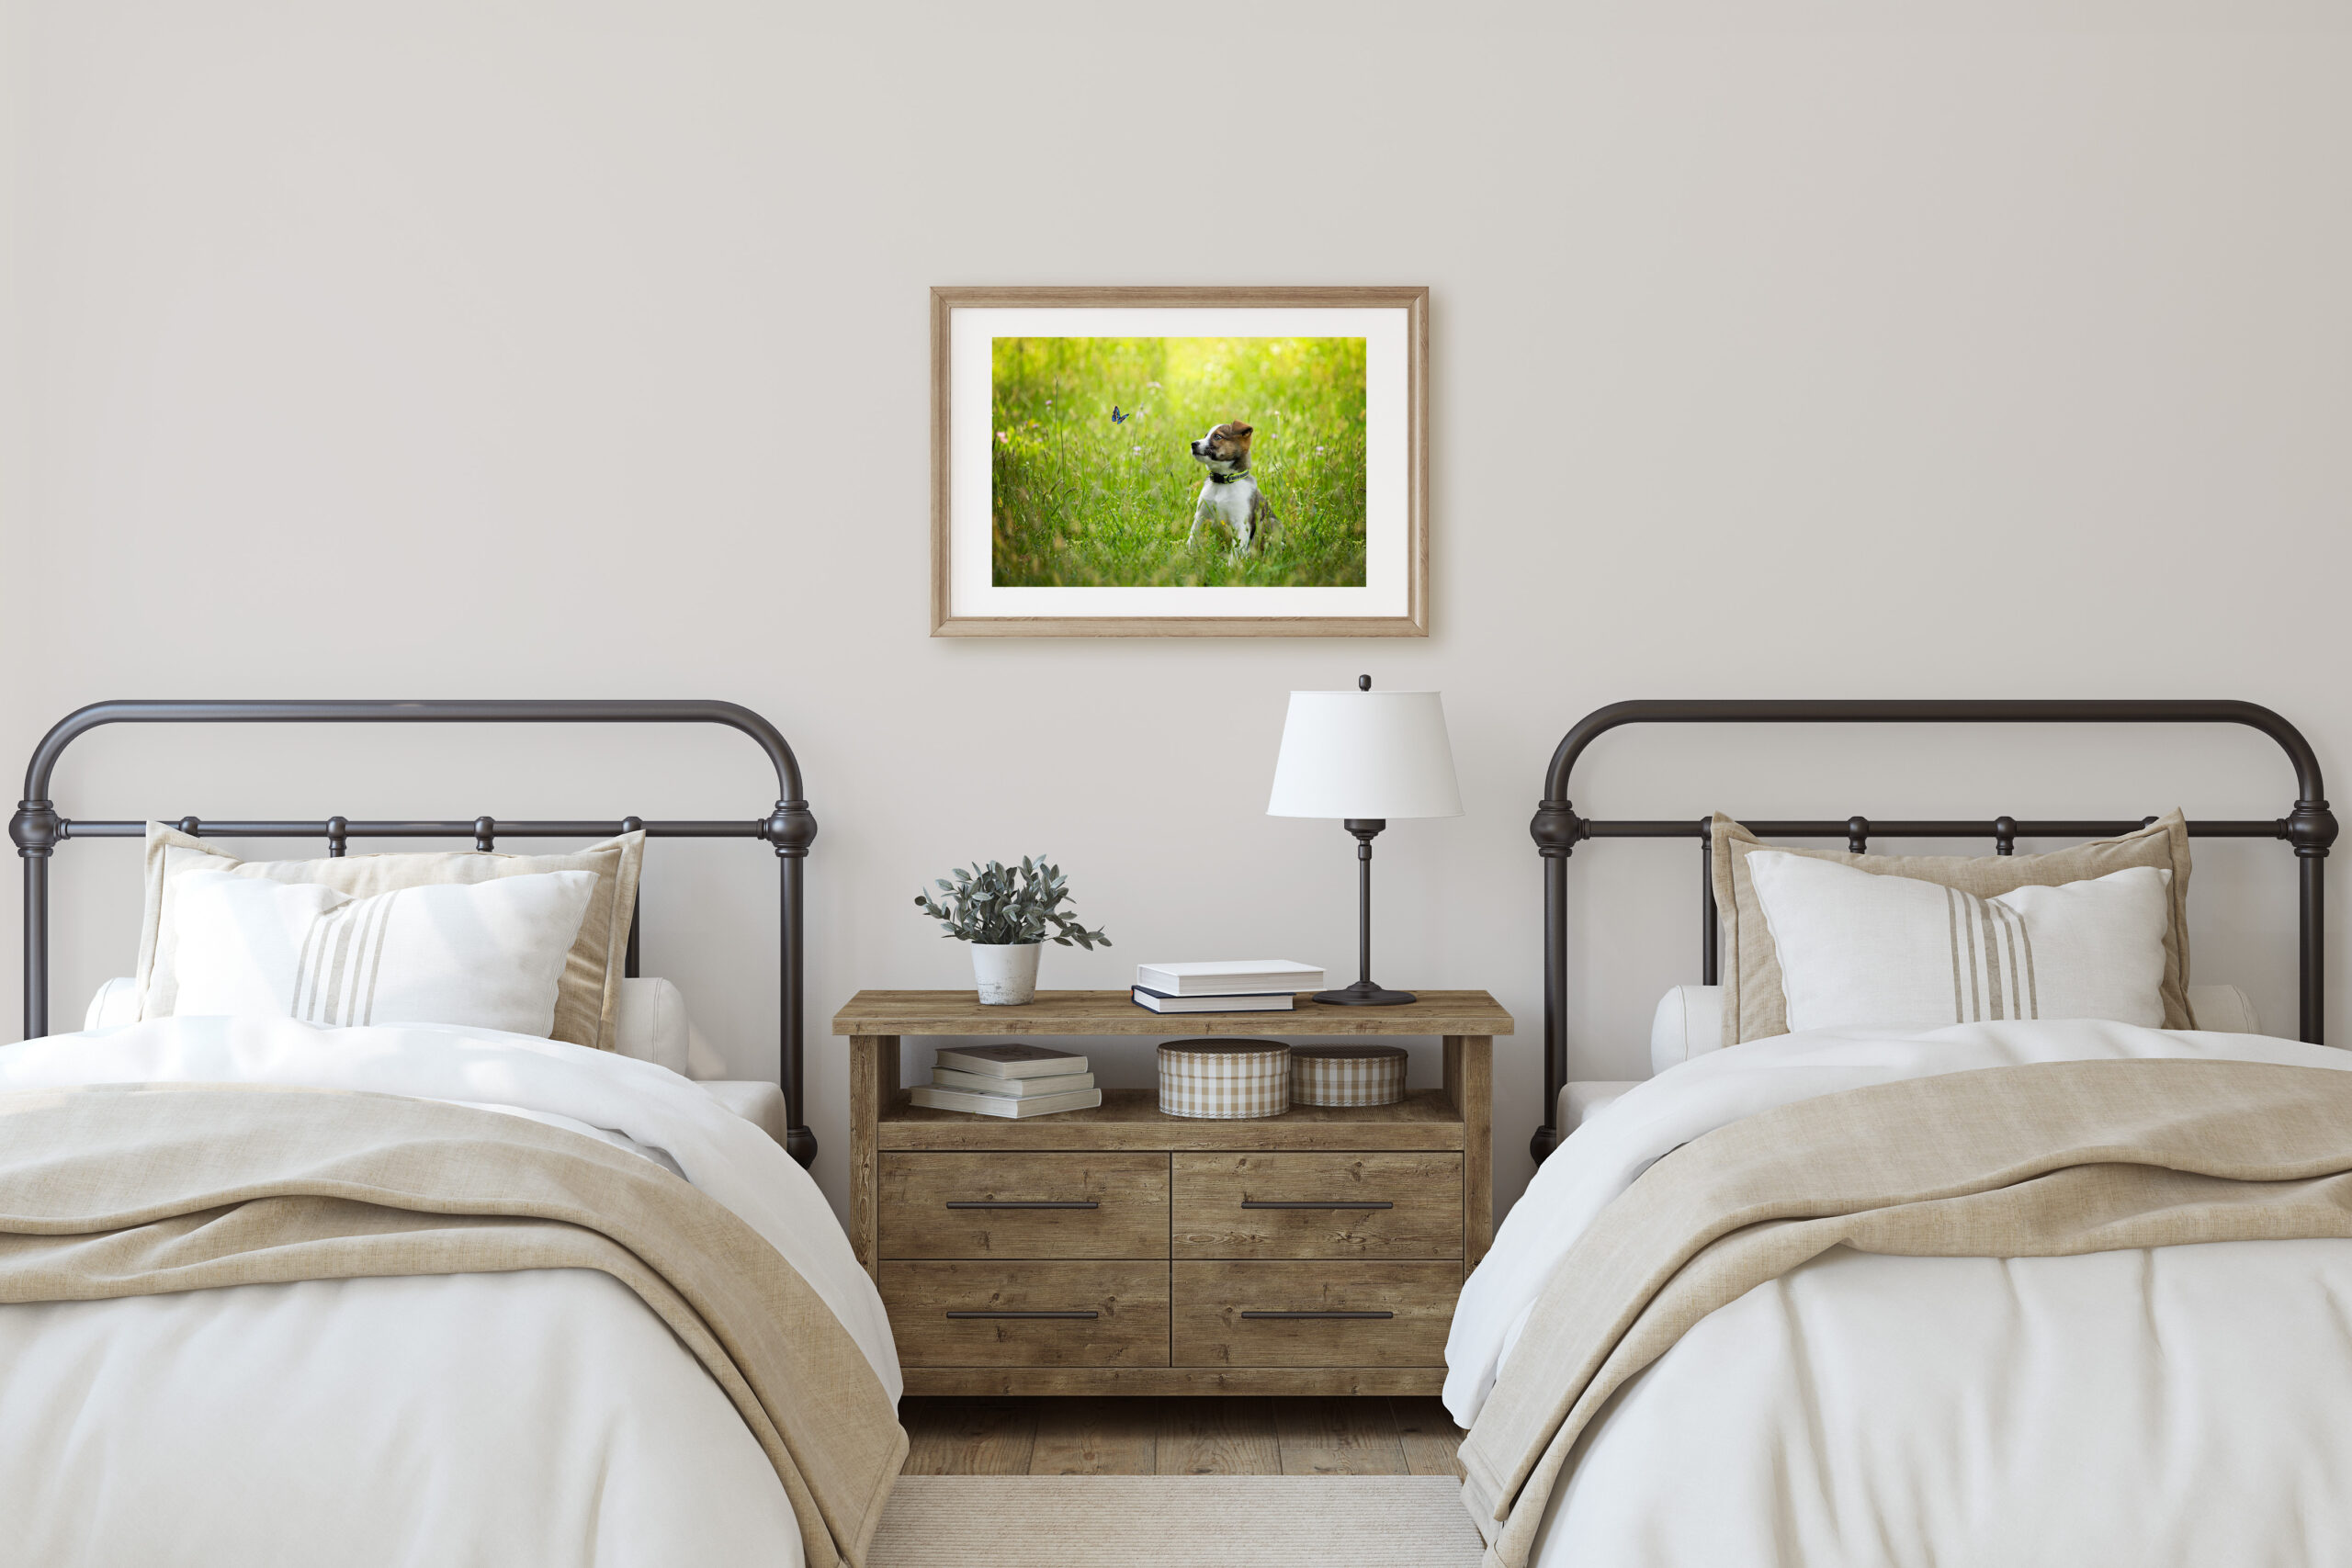 Framed Portrait of Puppy on Bedroom Wall